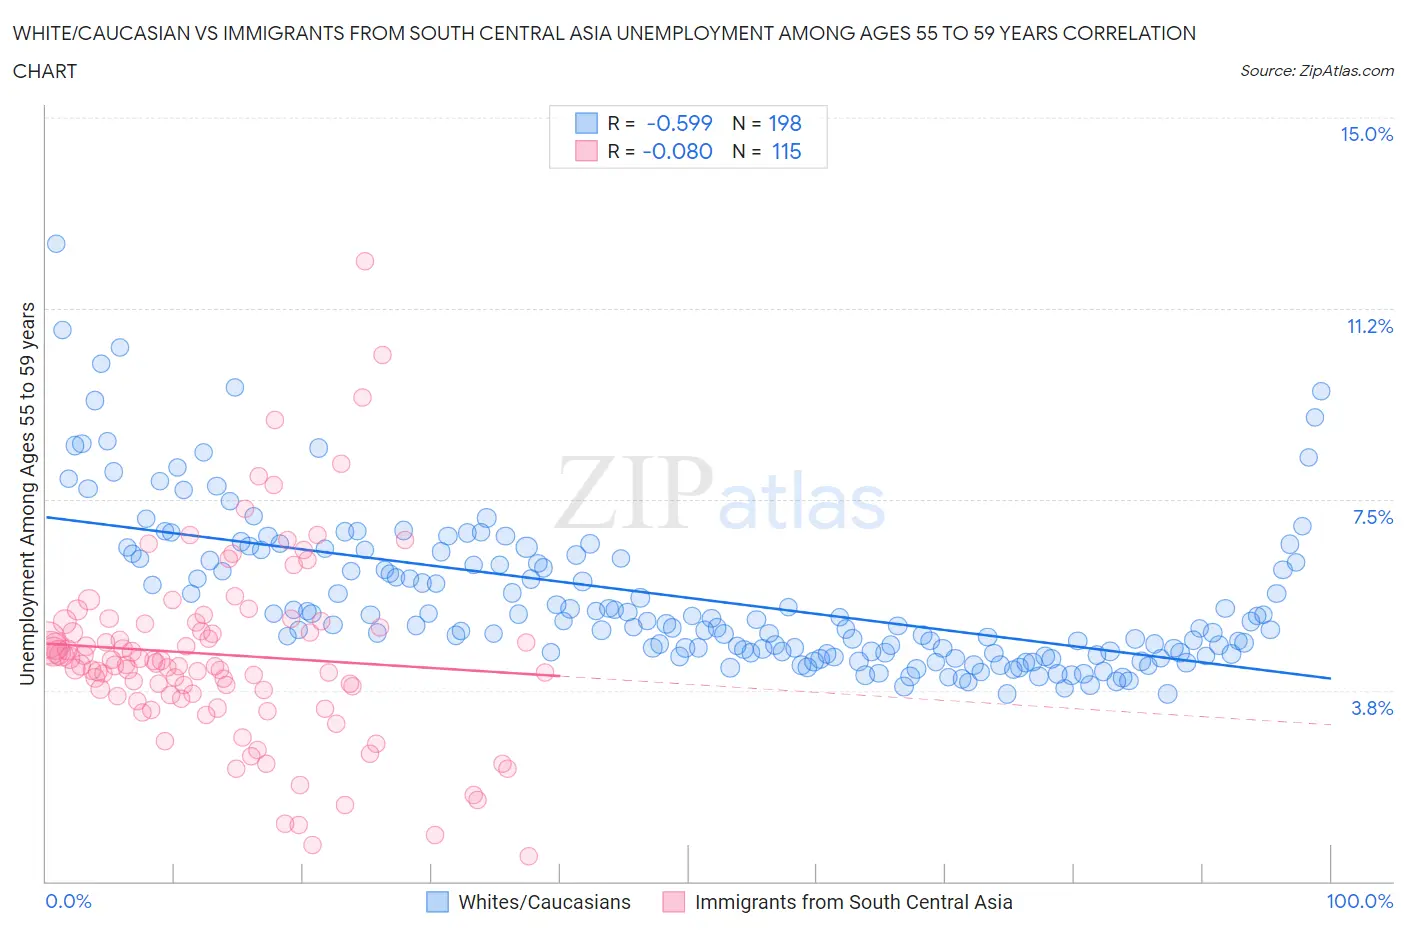 White/Caucasian vs Immigrants from South Central Asia Unemployment Among Ages 55 to 59 years